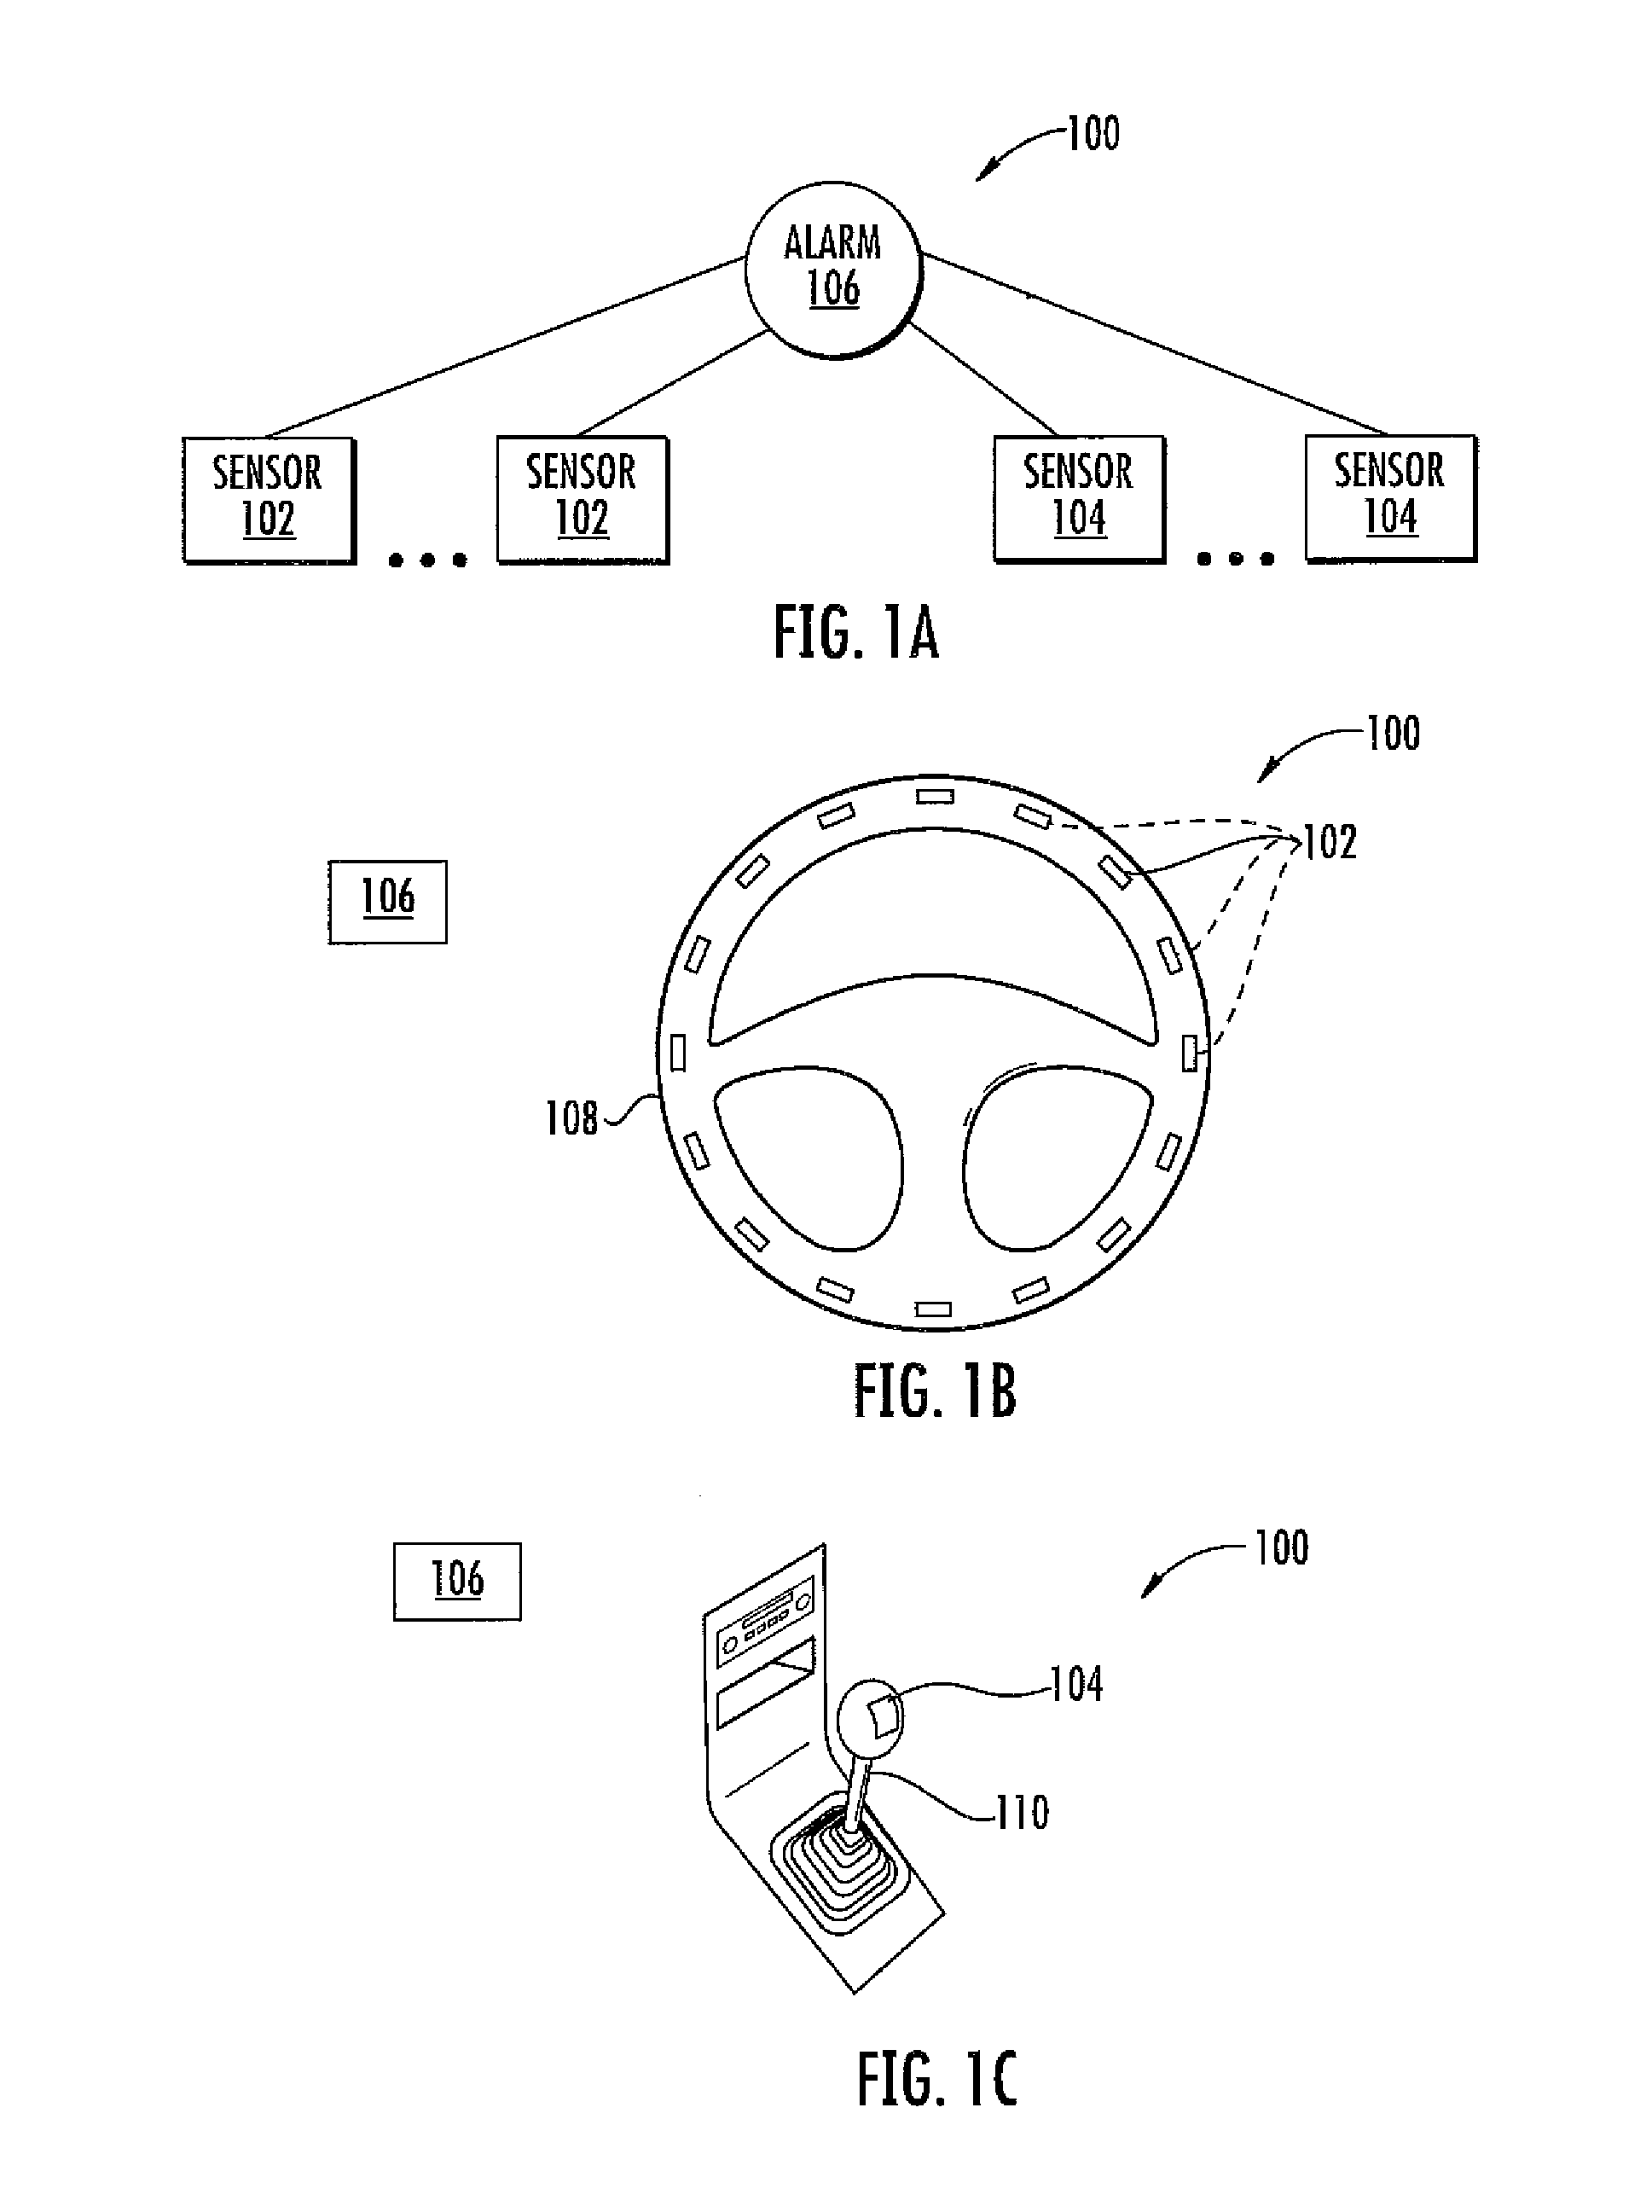 System and method for improving vehicle operator awareness